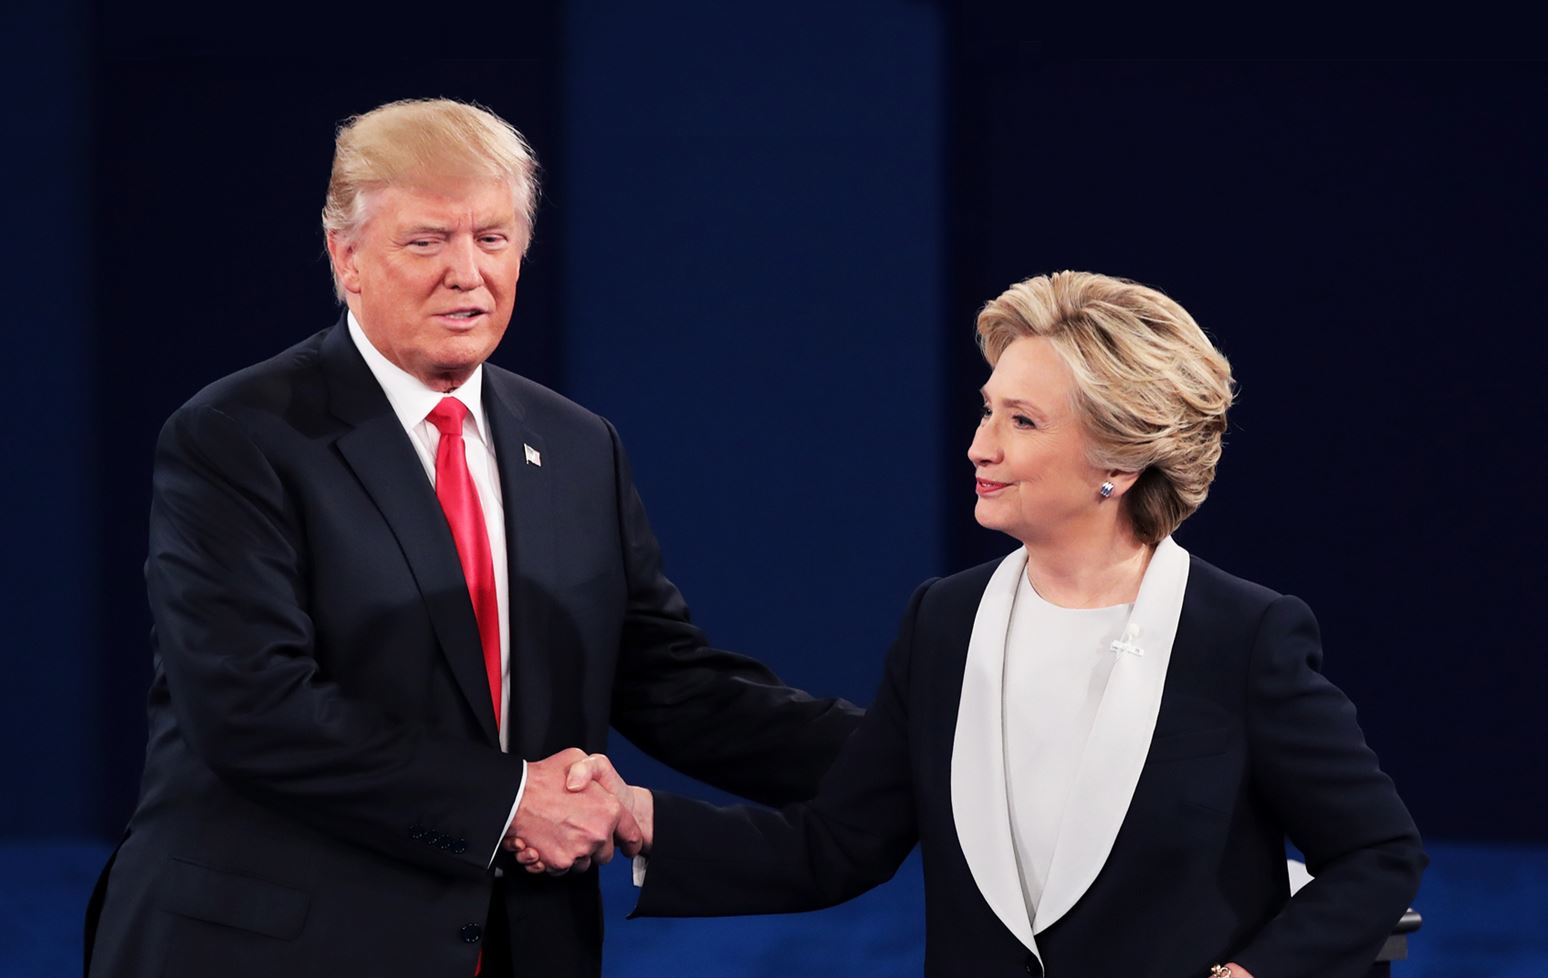 Survey finds Trump and Clinton fall short on leader character dimensions that matter the most to Americans